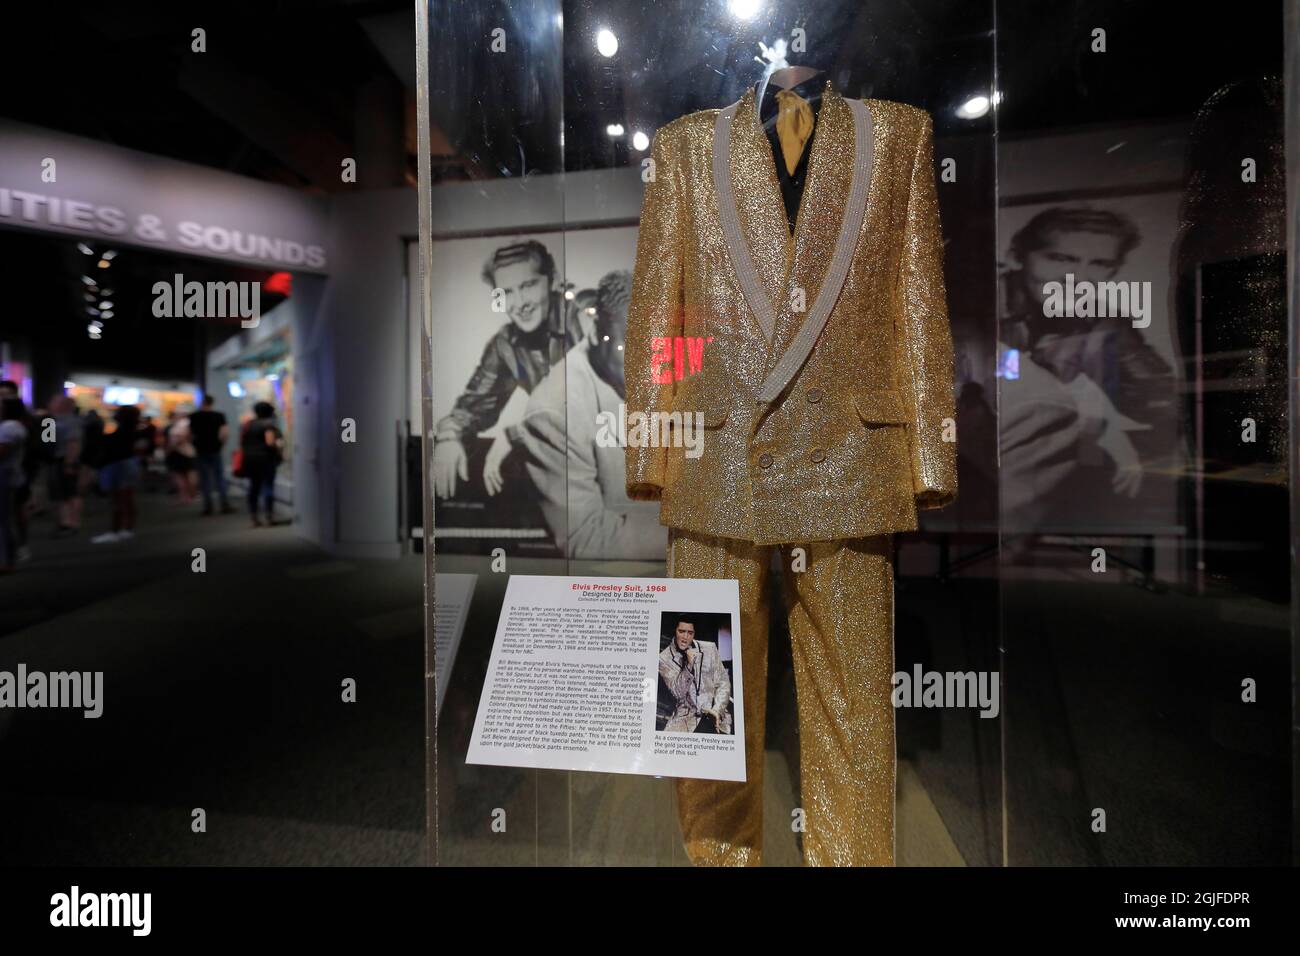 Elvis Presley Suit 1968 display in Rock and Roll Hall of Fame.Cleveland.Ohio.USA Stock Photo